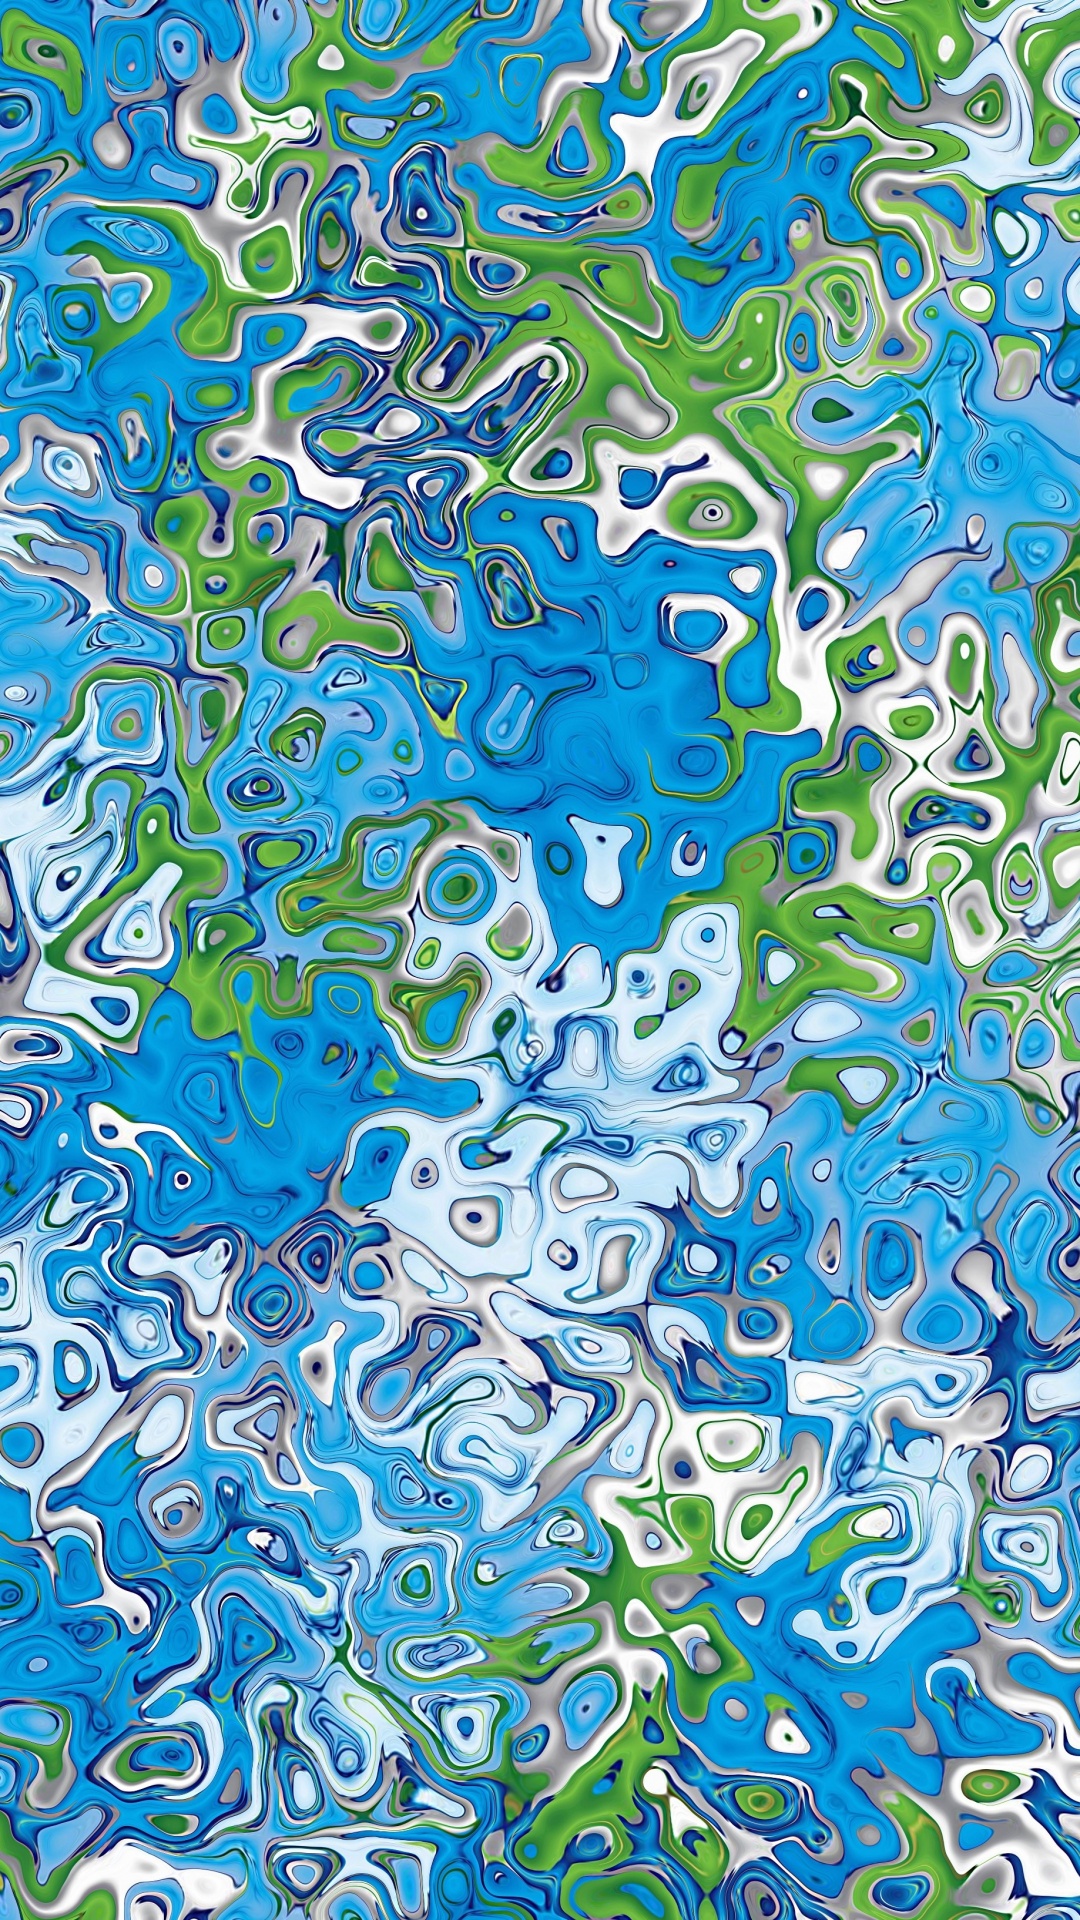 Green Blue and White Abstract Painting. Wallpaper in 1080x1920 Resolution